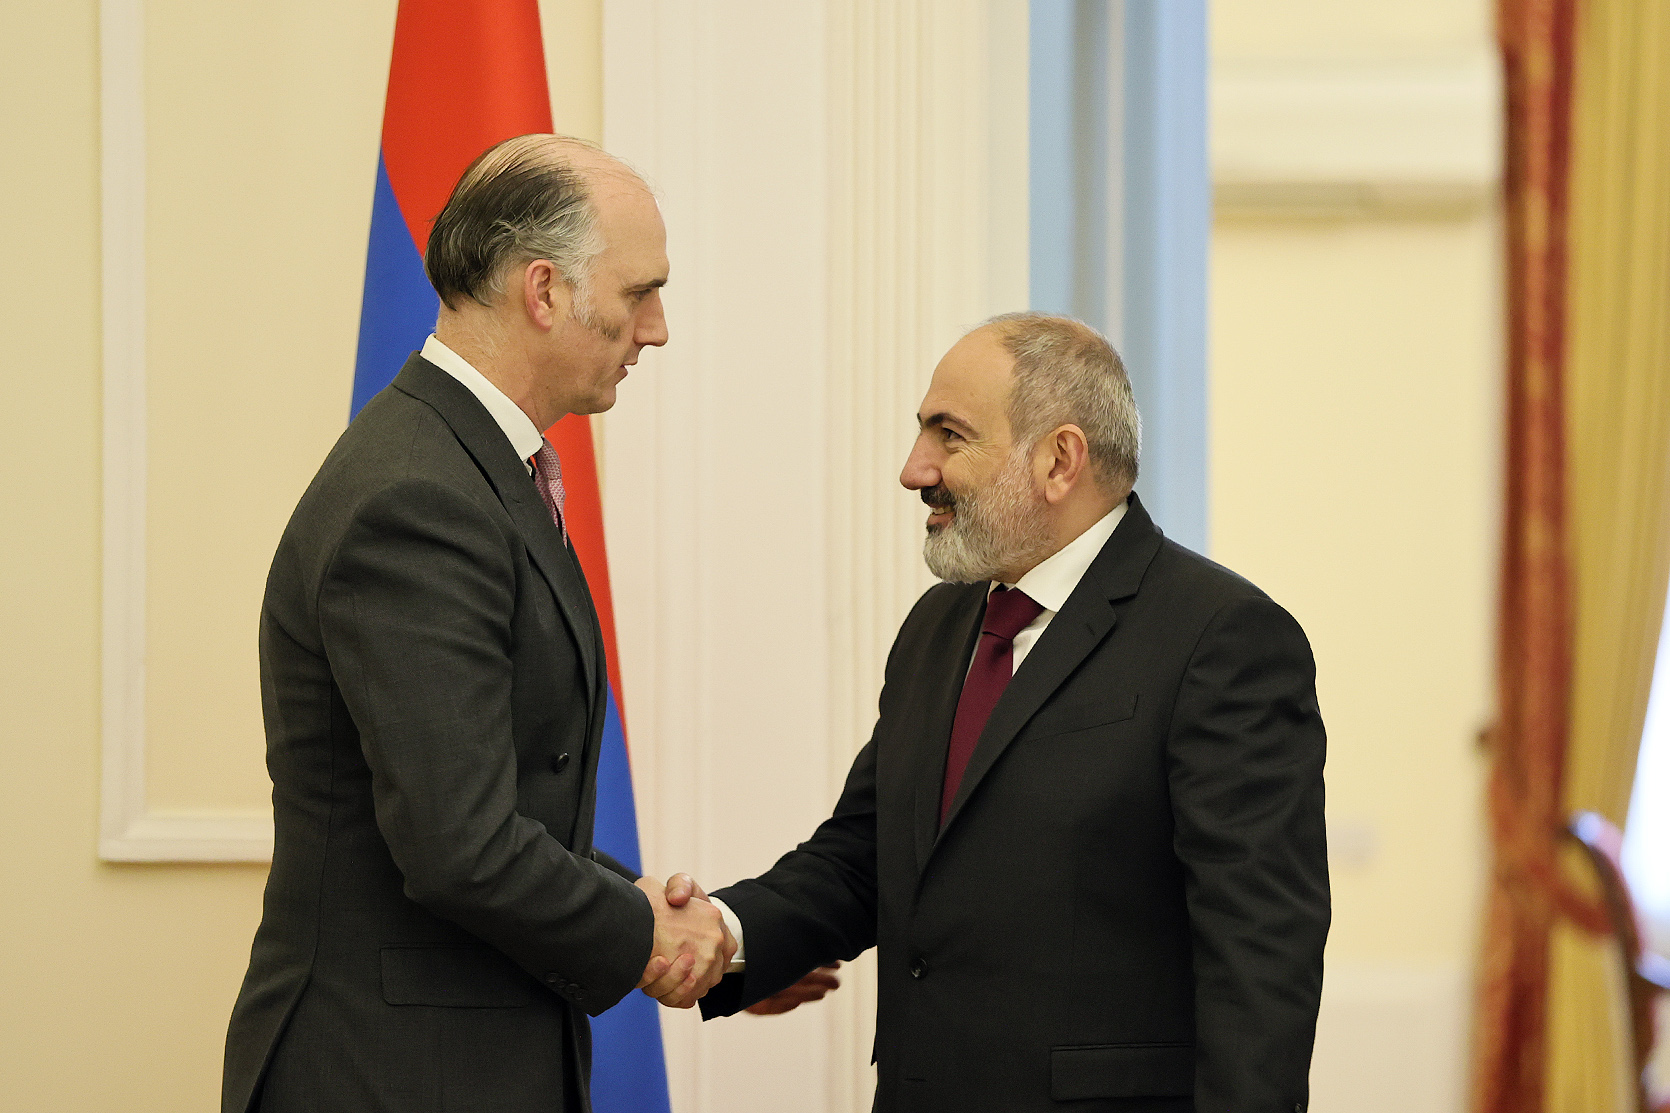 New stage of Armenian-British relations